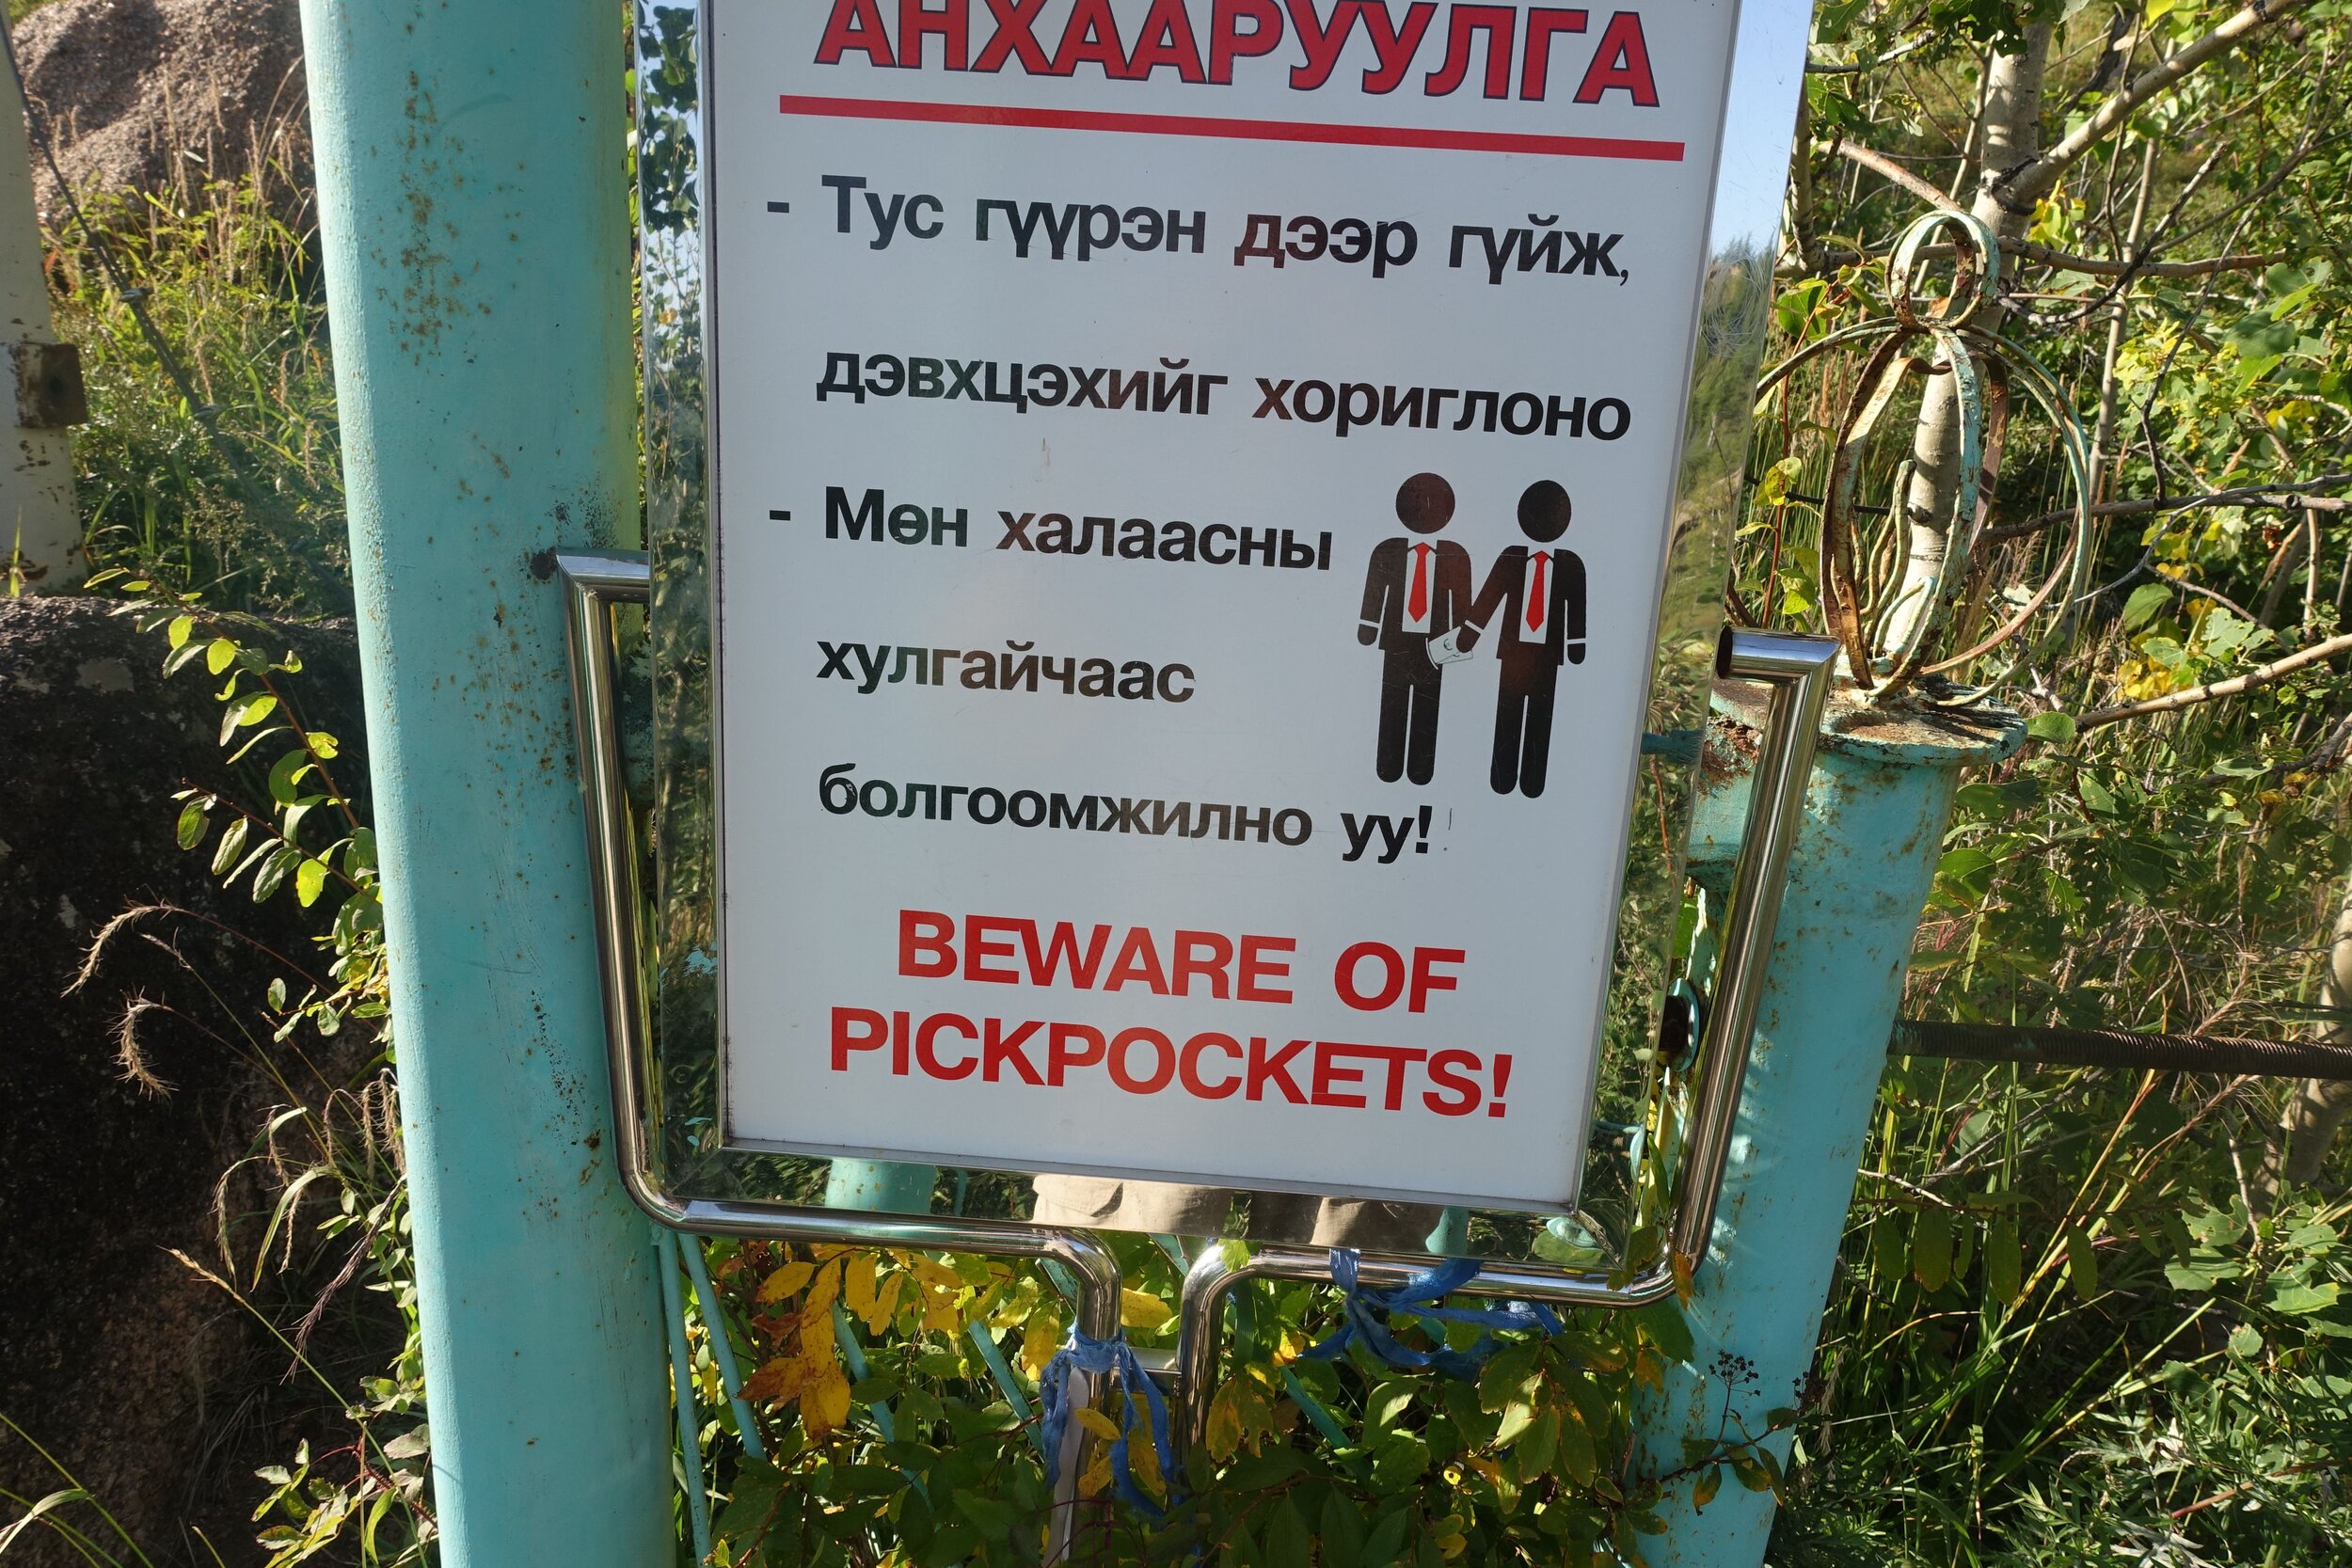 Copy of Watch out for pickpockets wearing suits and ties